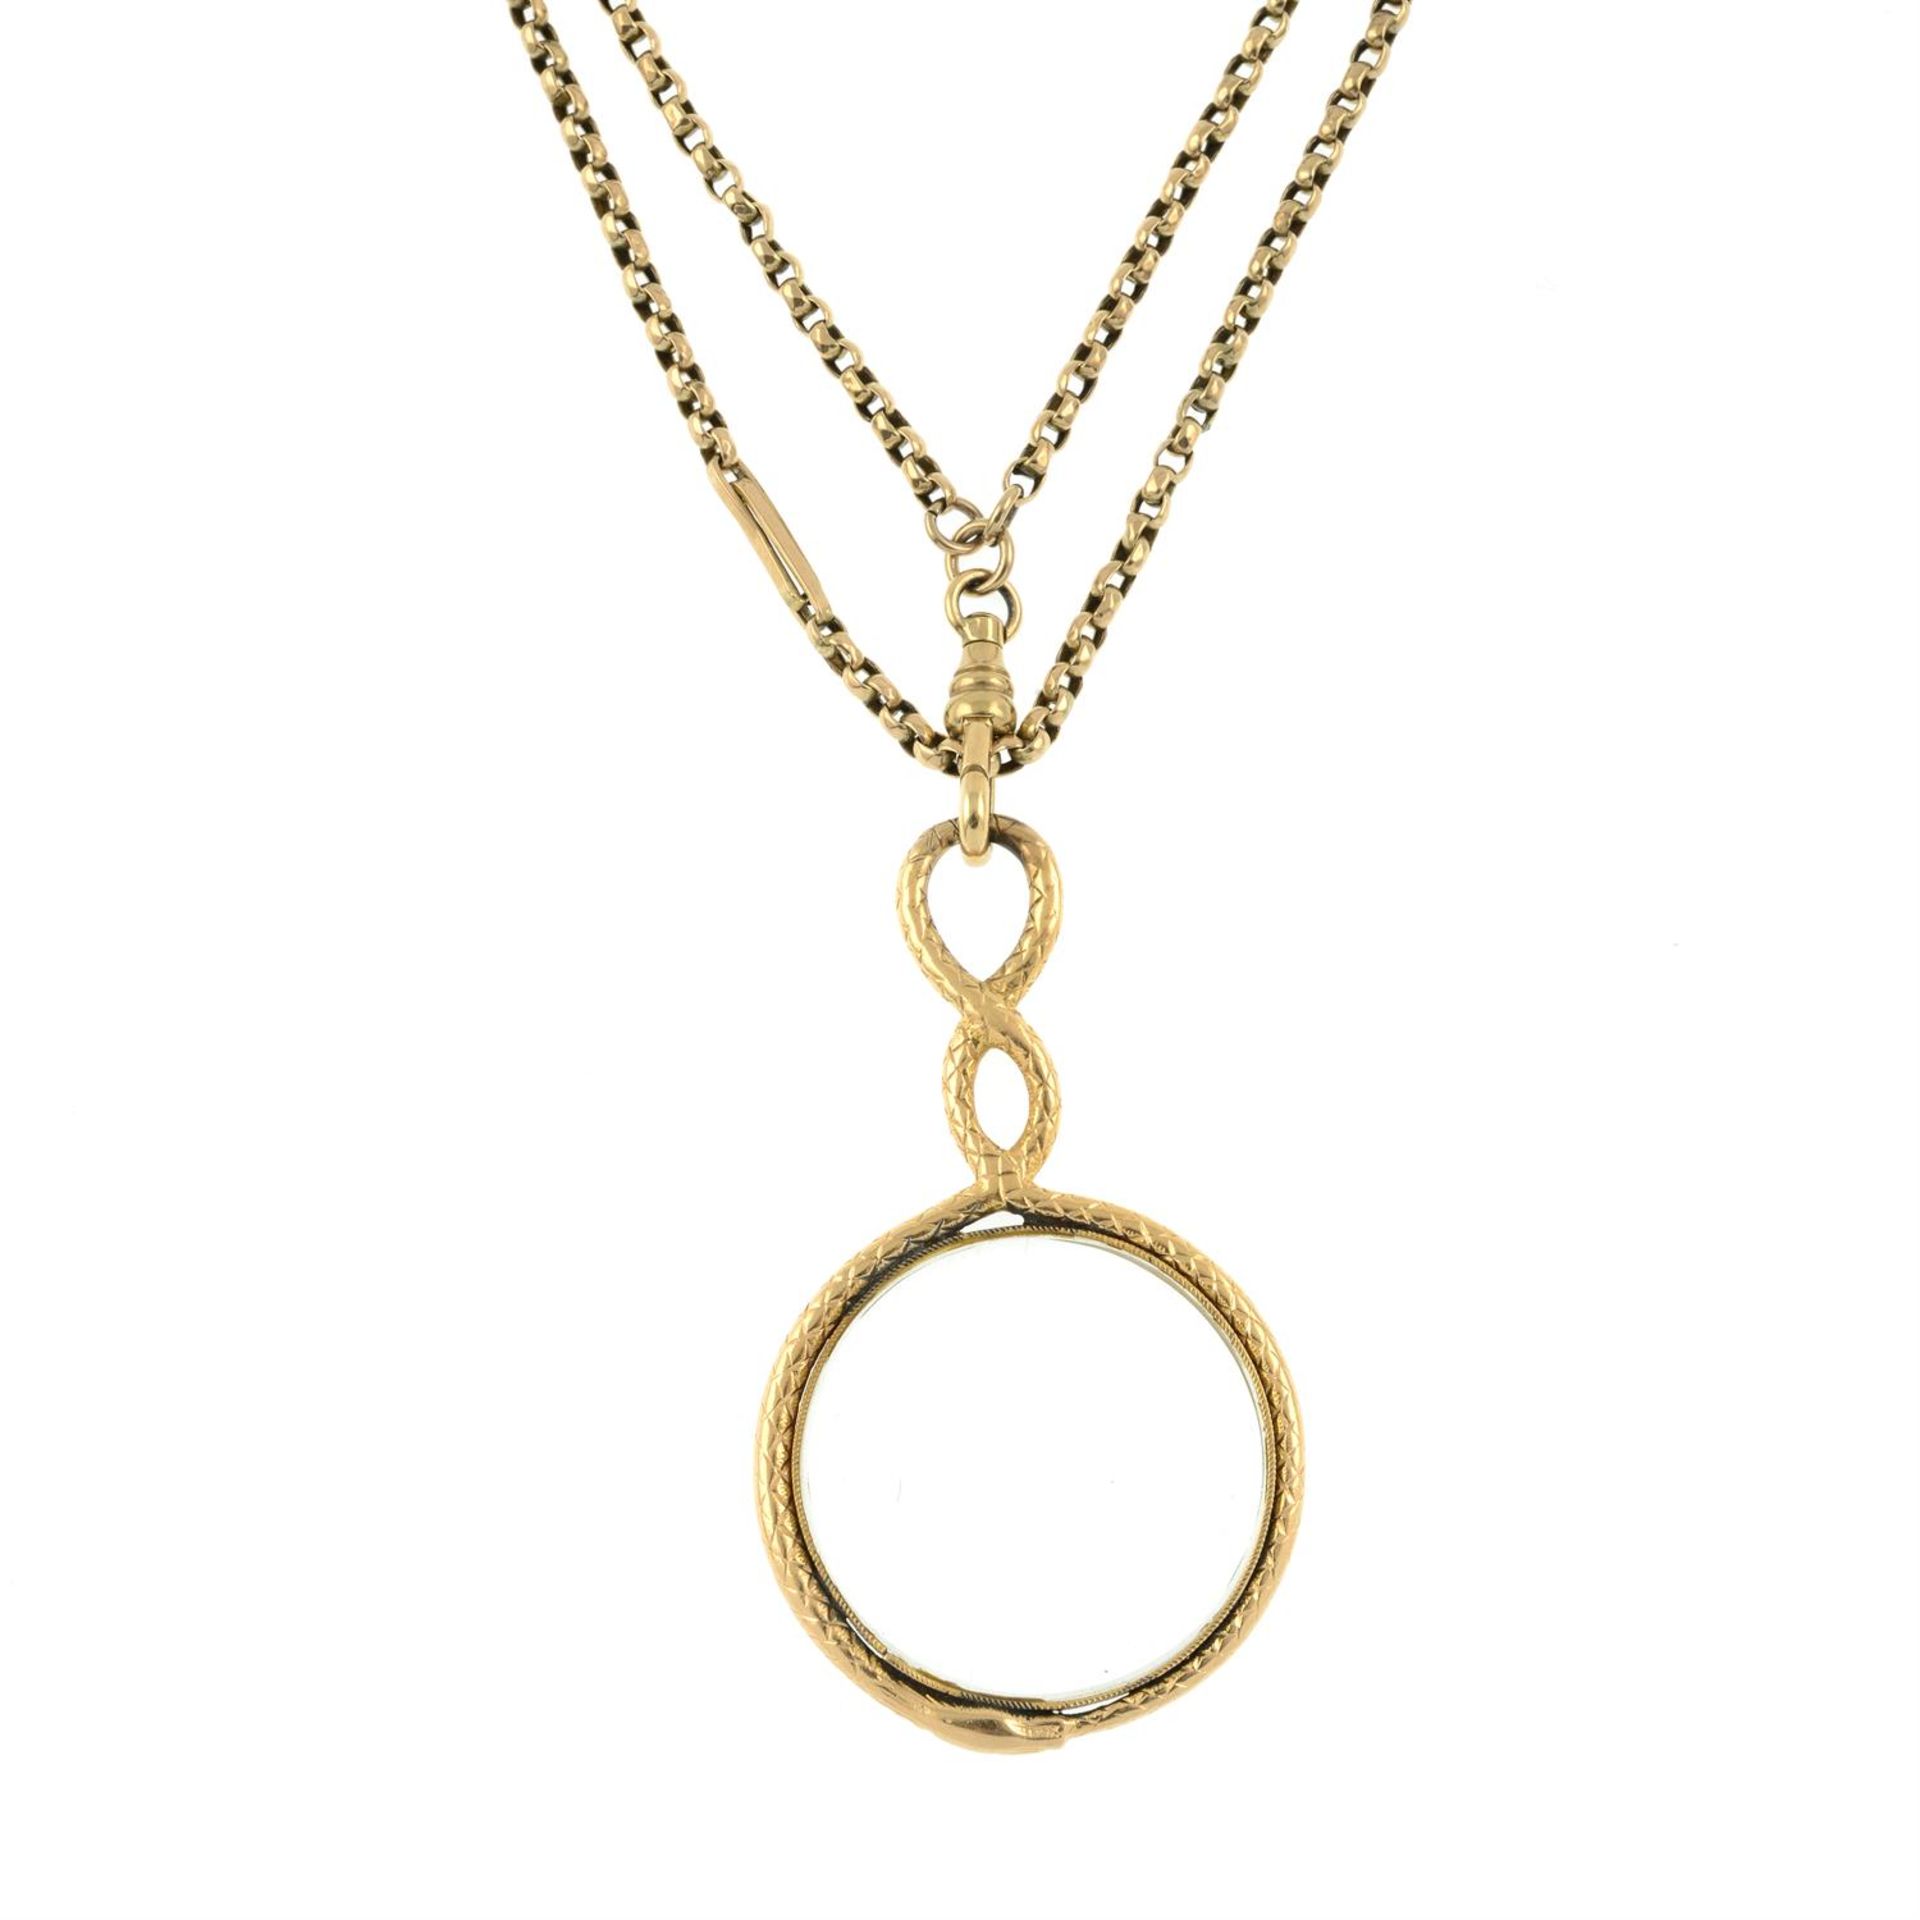 A late Georgian 15ct gold ouroboros snake magnifying glass, with late 19th century long guard chain. - Image 2 of 4